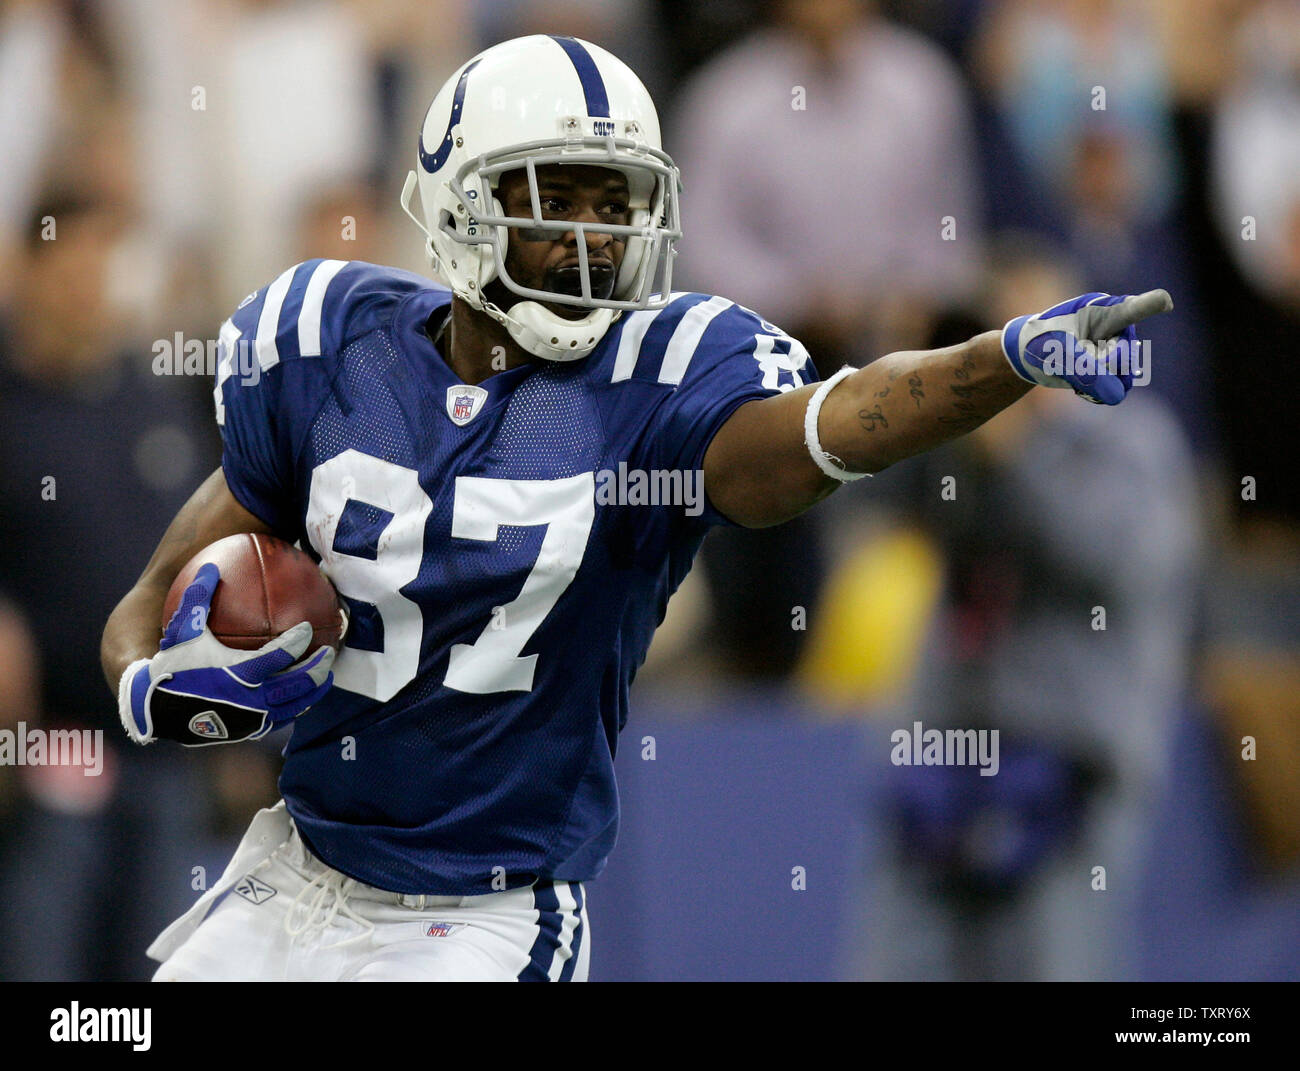 Indianapolis WR Reggie Wayne celebrates one of his two touchdowns in the AFC wild card playoff at the RCA Dome in Indianapolis, IN on January 9, 2005. The Indianapolis Colts defeated the Denver Broncos 49-24 . (UPI Photo/Mark Cowan) Stock Photo